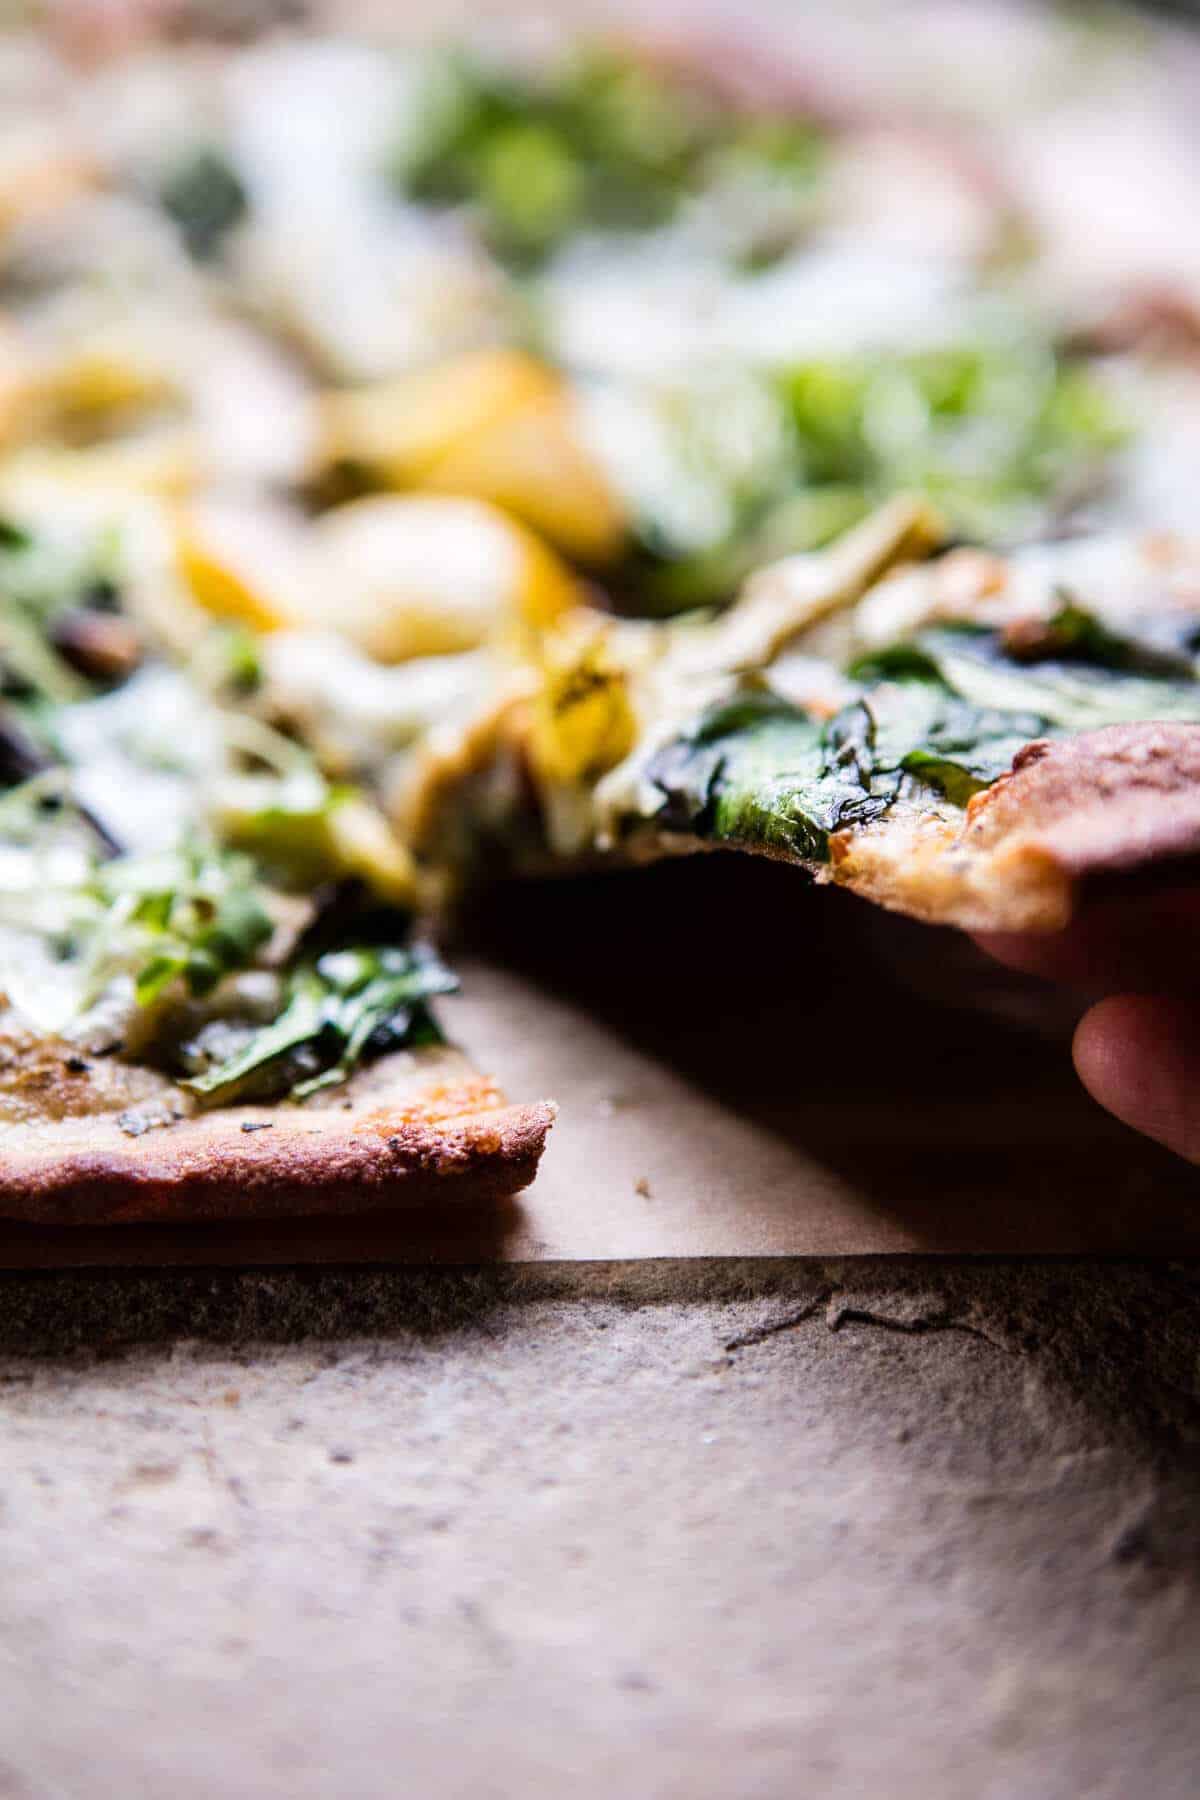 Whole Wheat Spinach and Artichoke Pizza | halfbakedharvest.com @hbharvest